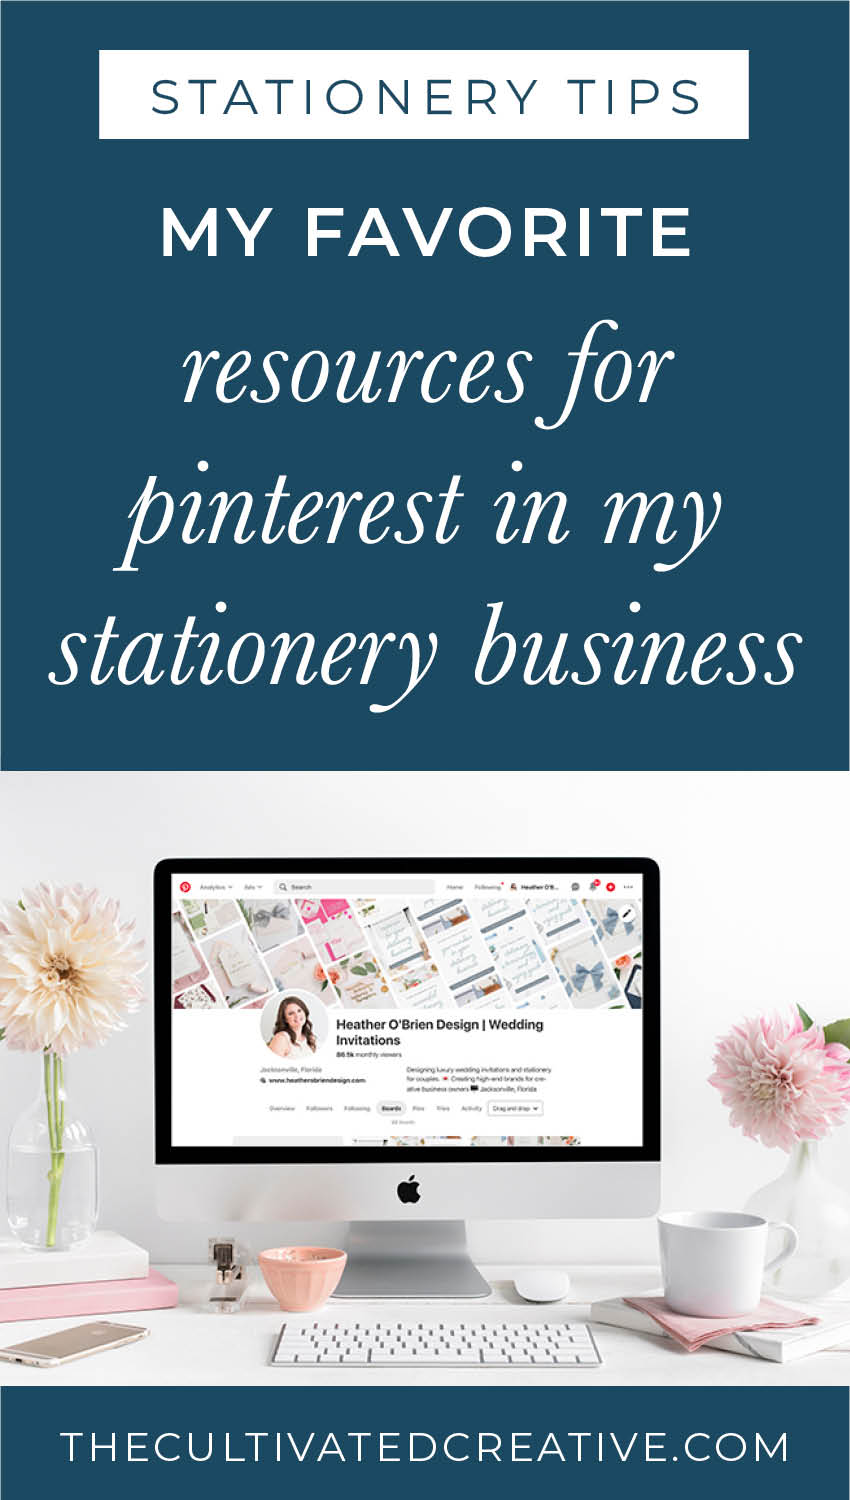 My favorite resources for Pinterest in my stationery business | A must have marketing tool for stationers